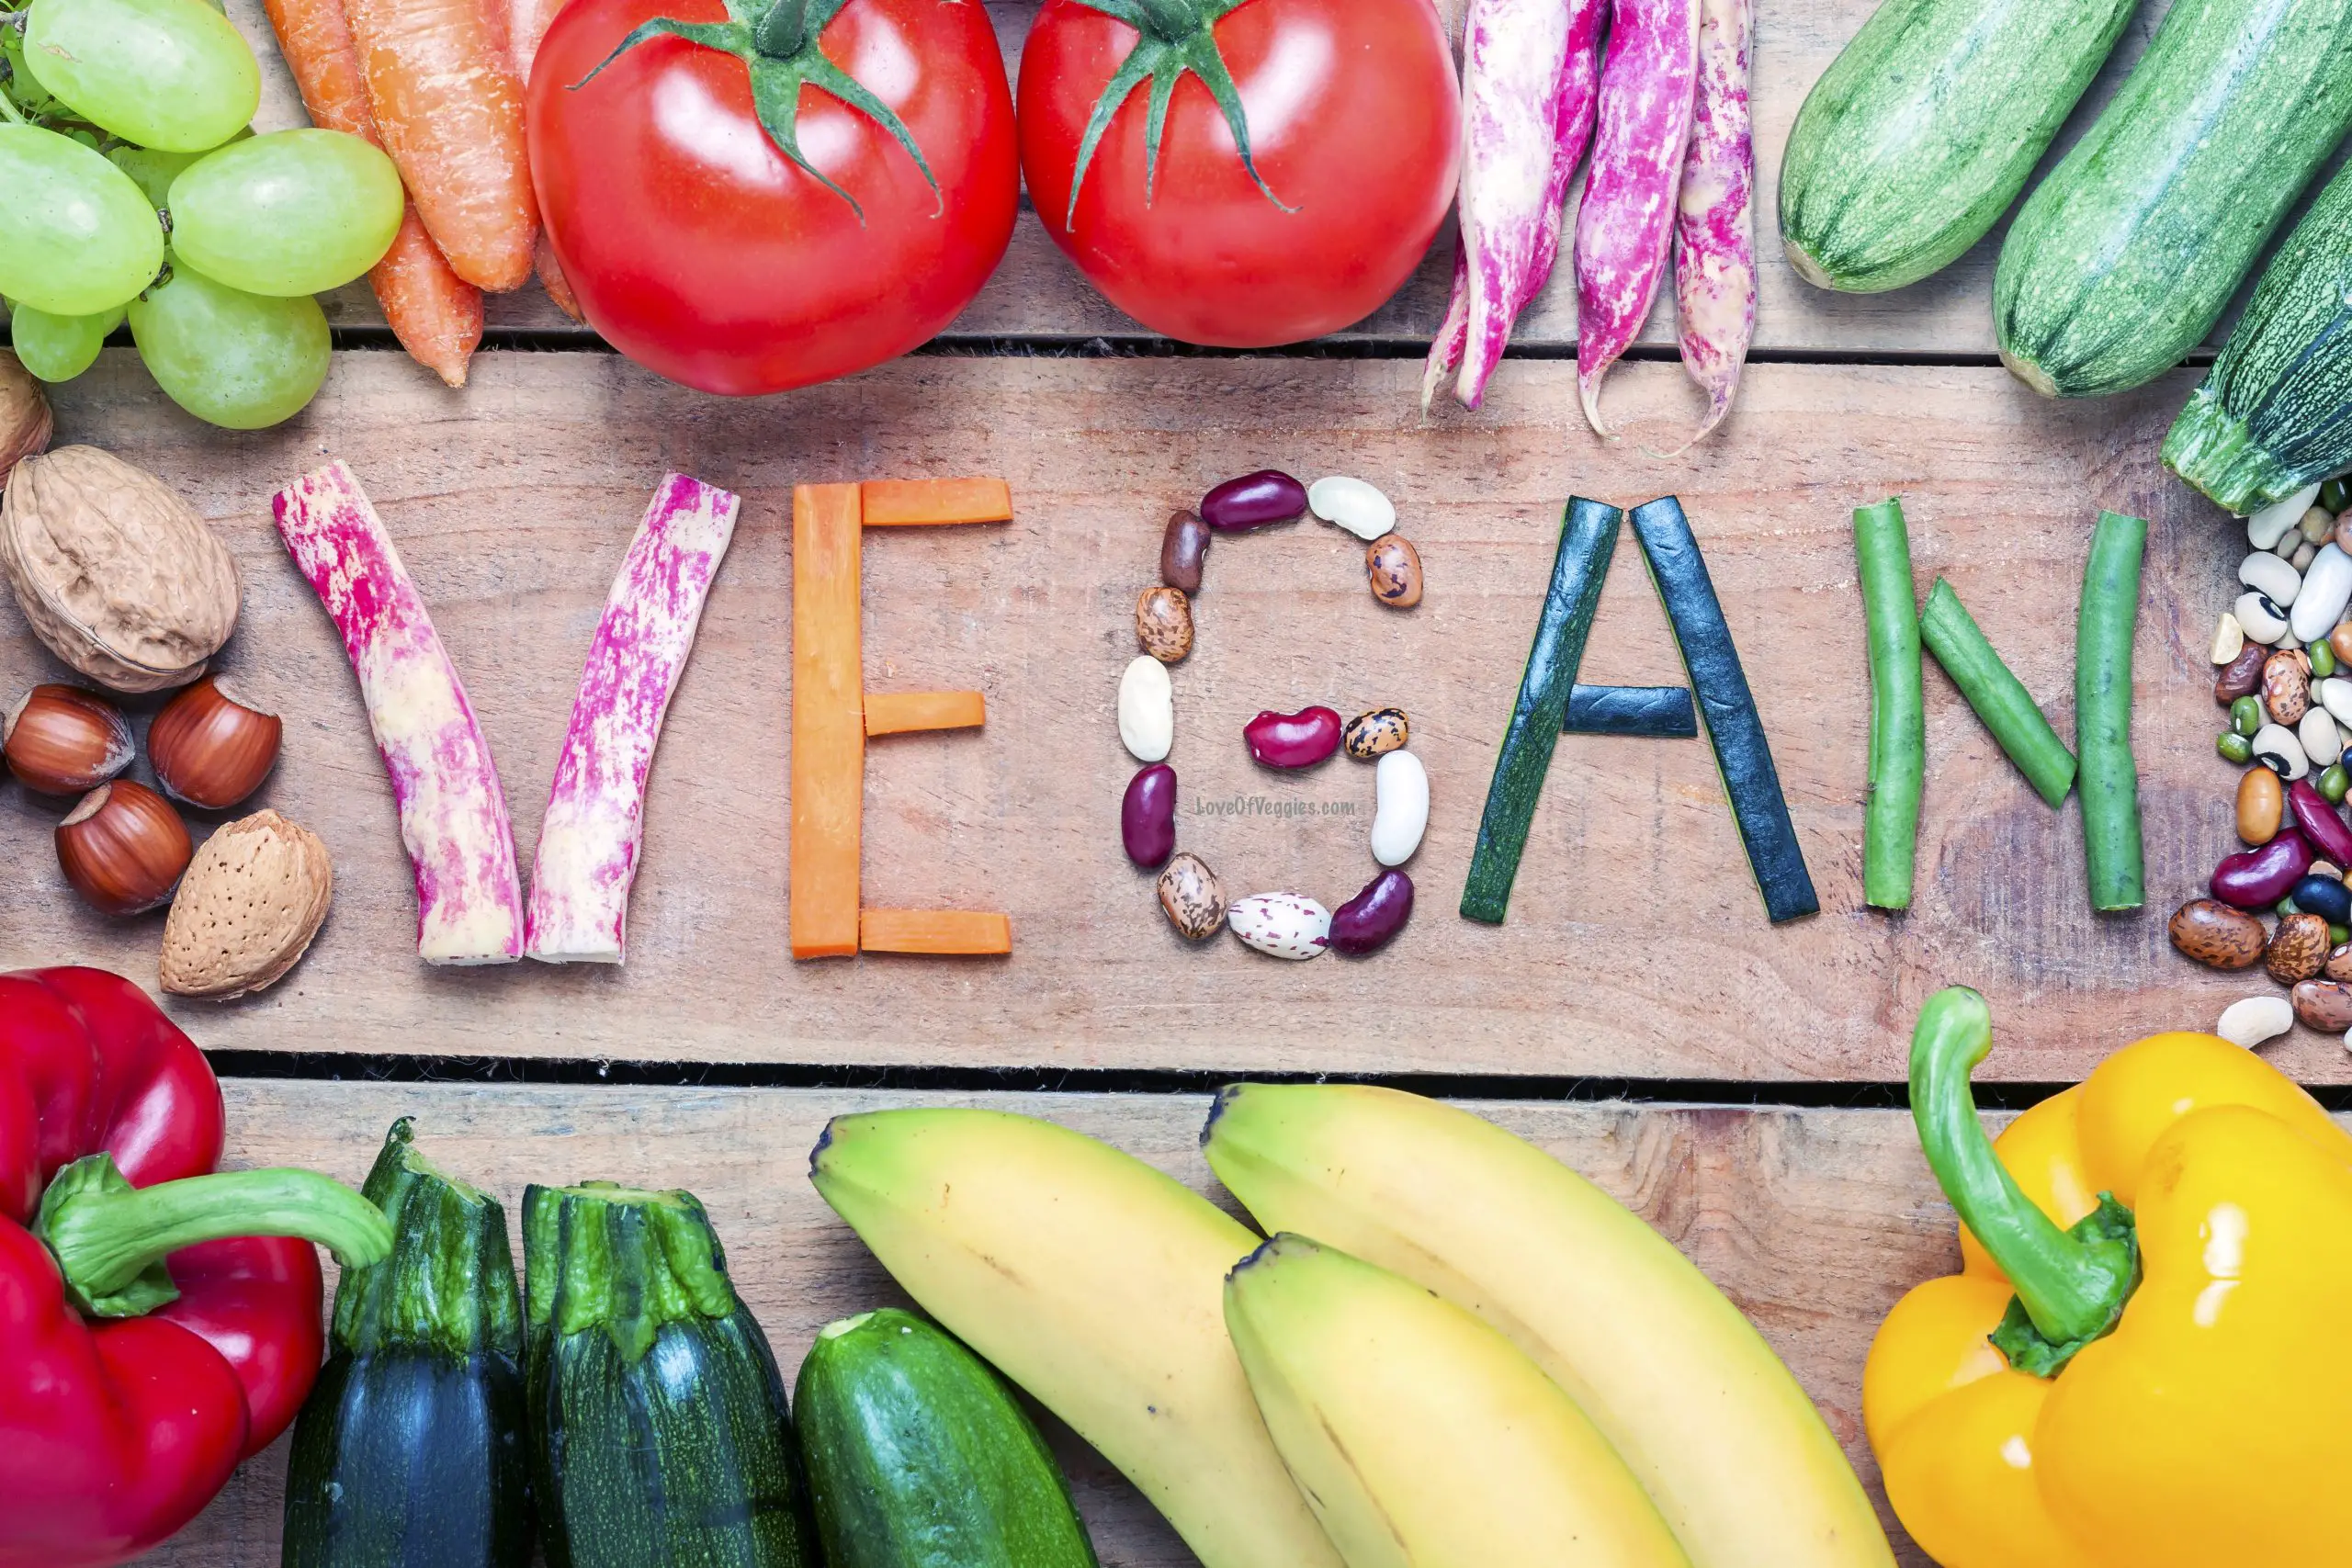 Eating a Balanced Vegan Diet: What You Need to Know